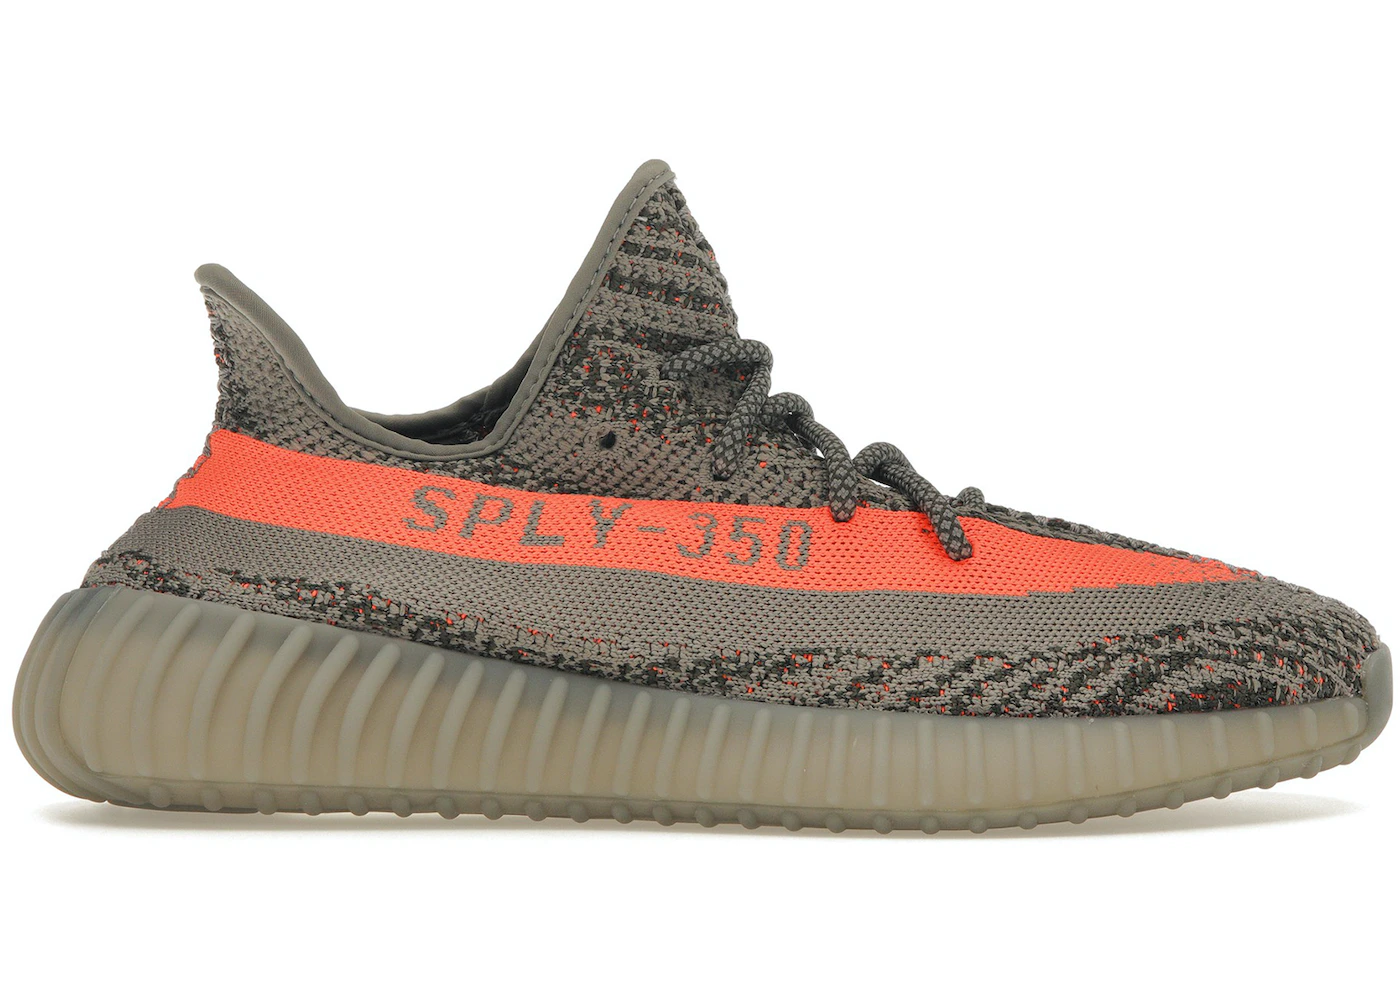 Which one cost As fast as a flash adidas Yeezy Boost 350 V2 Beluga Reflective - GW1229 - US